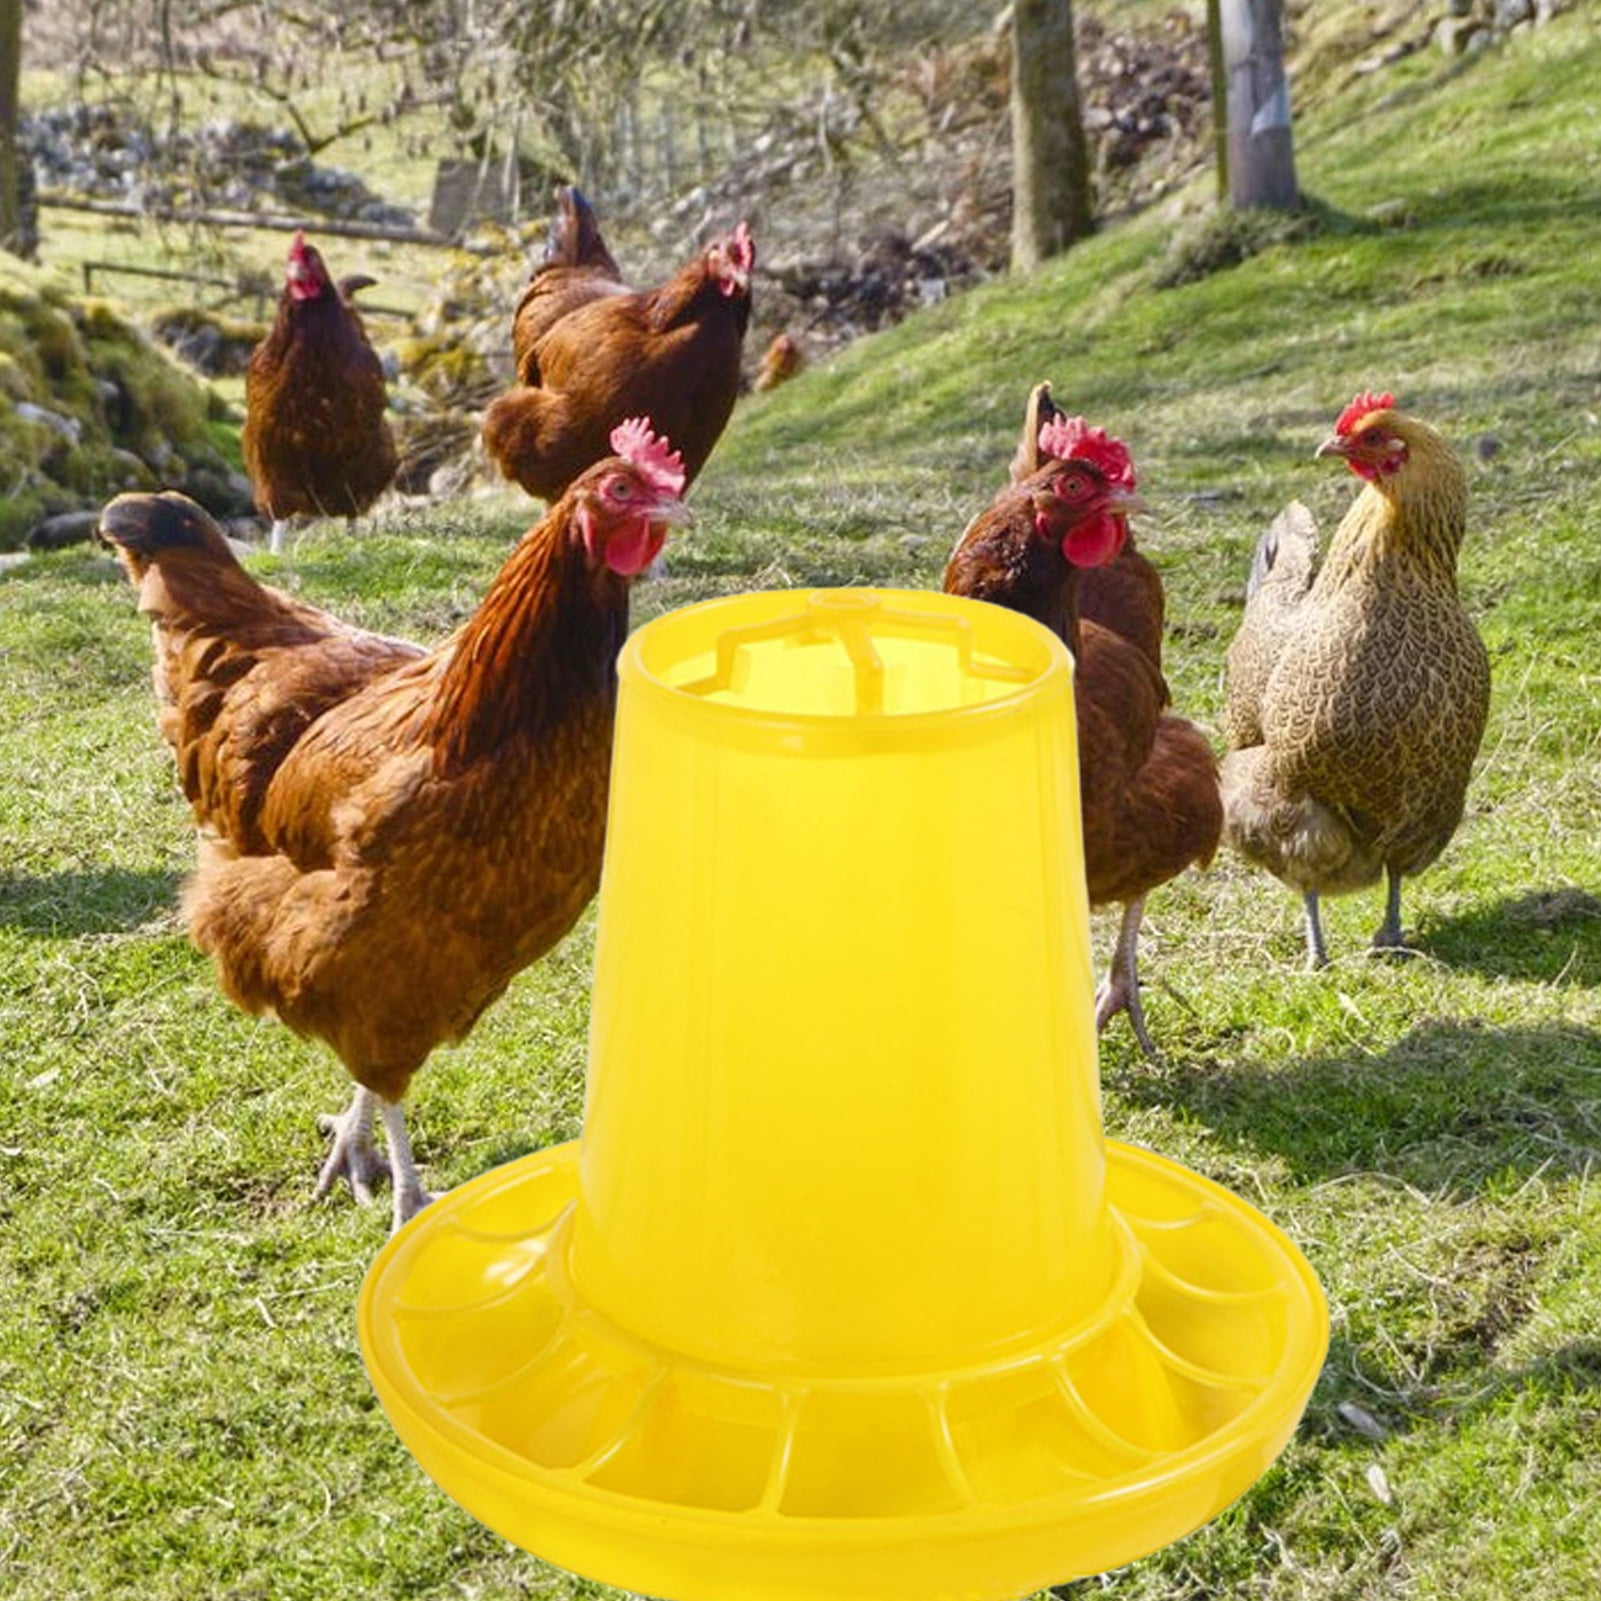 Happy Date Poultry Feeder Chicken Feed, Free Range Hanging Chicken Feeder,  Easy Use PE Strong Toughness Portable Poultry Feeder for Garden 